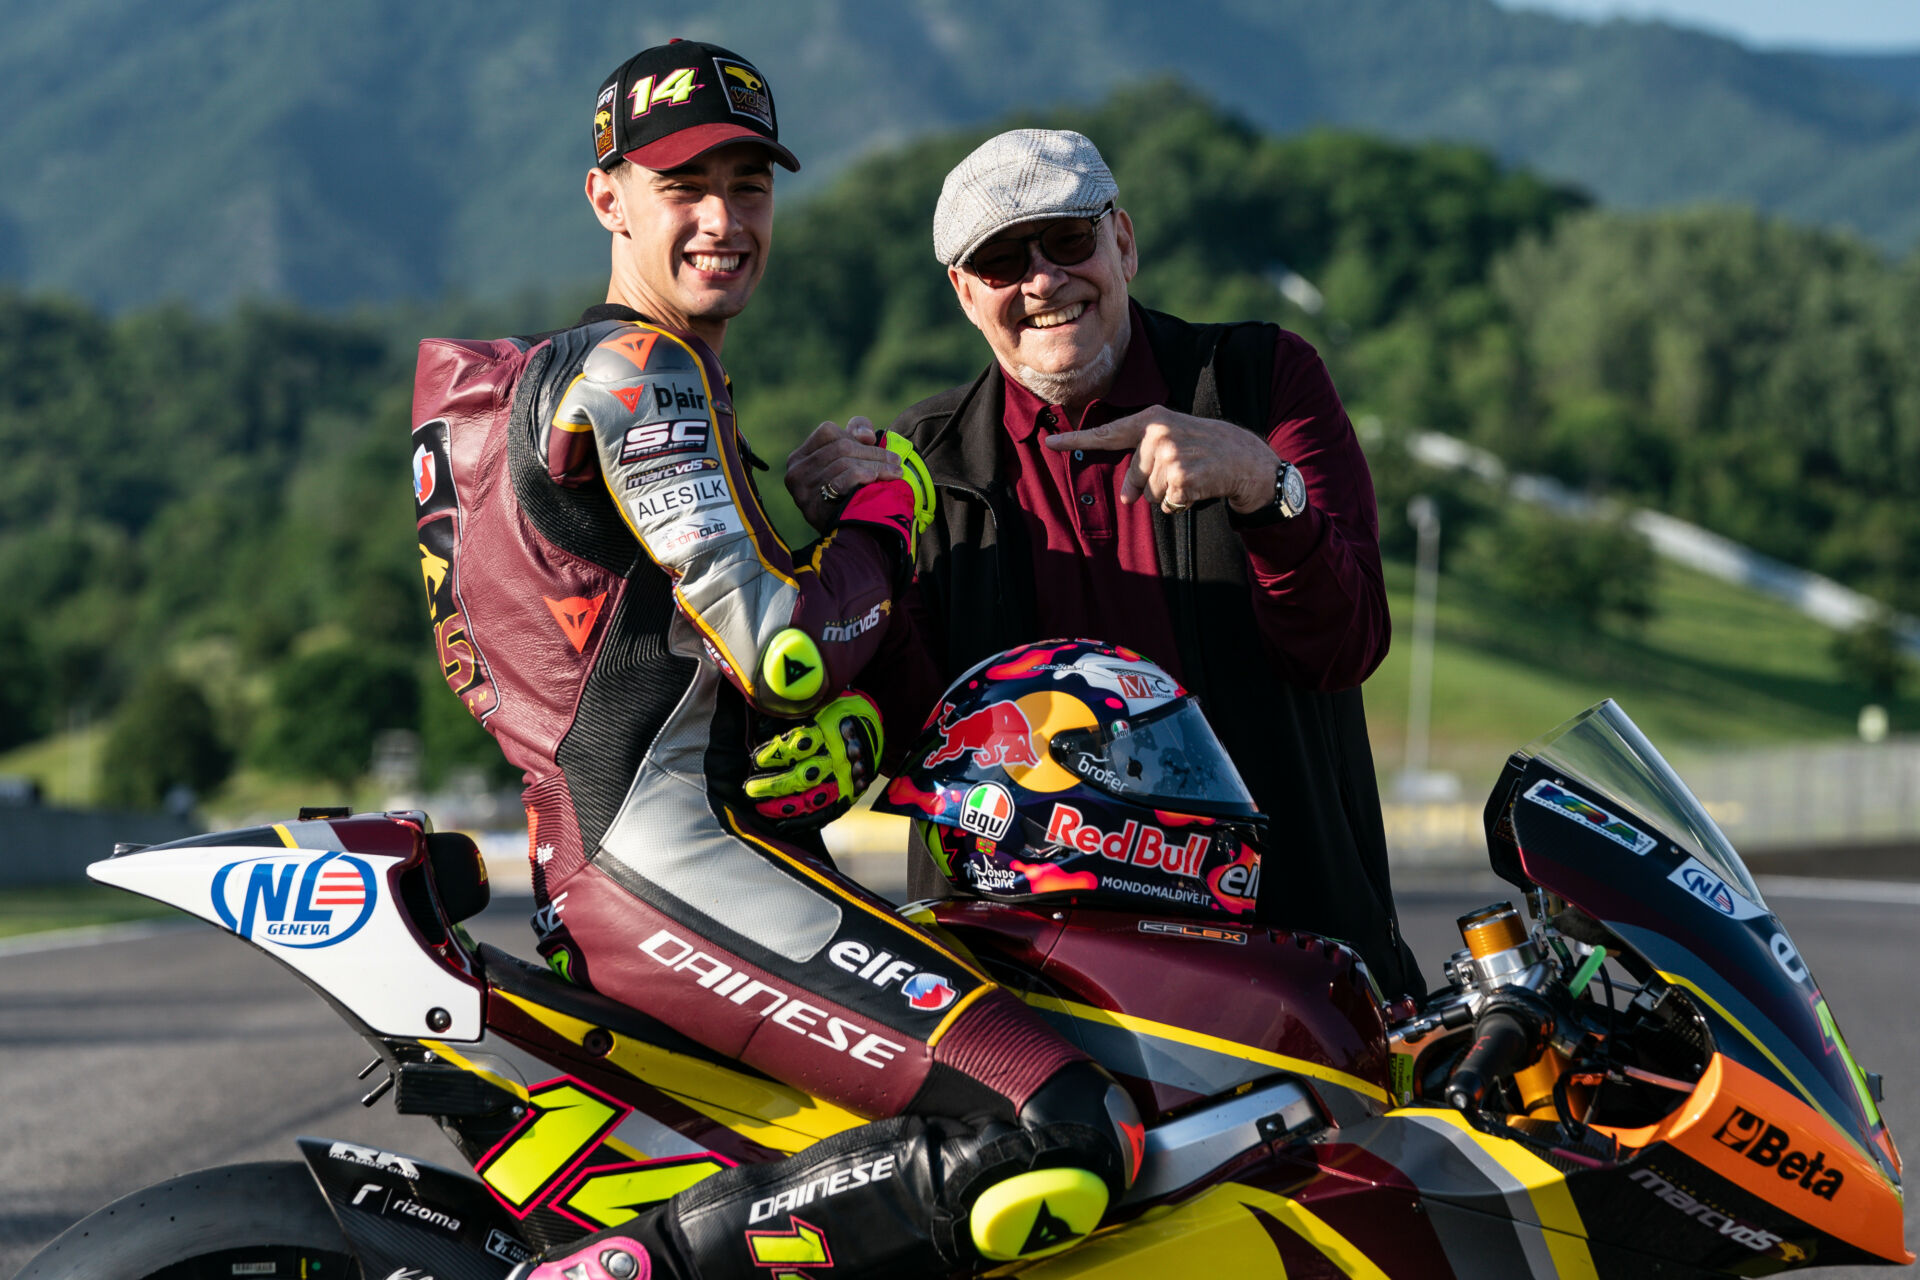 Tony Arbolino (left) and Marc van der Straten (right). Photo courtesy Marc VDS Racing Team.